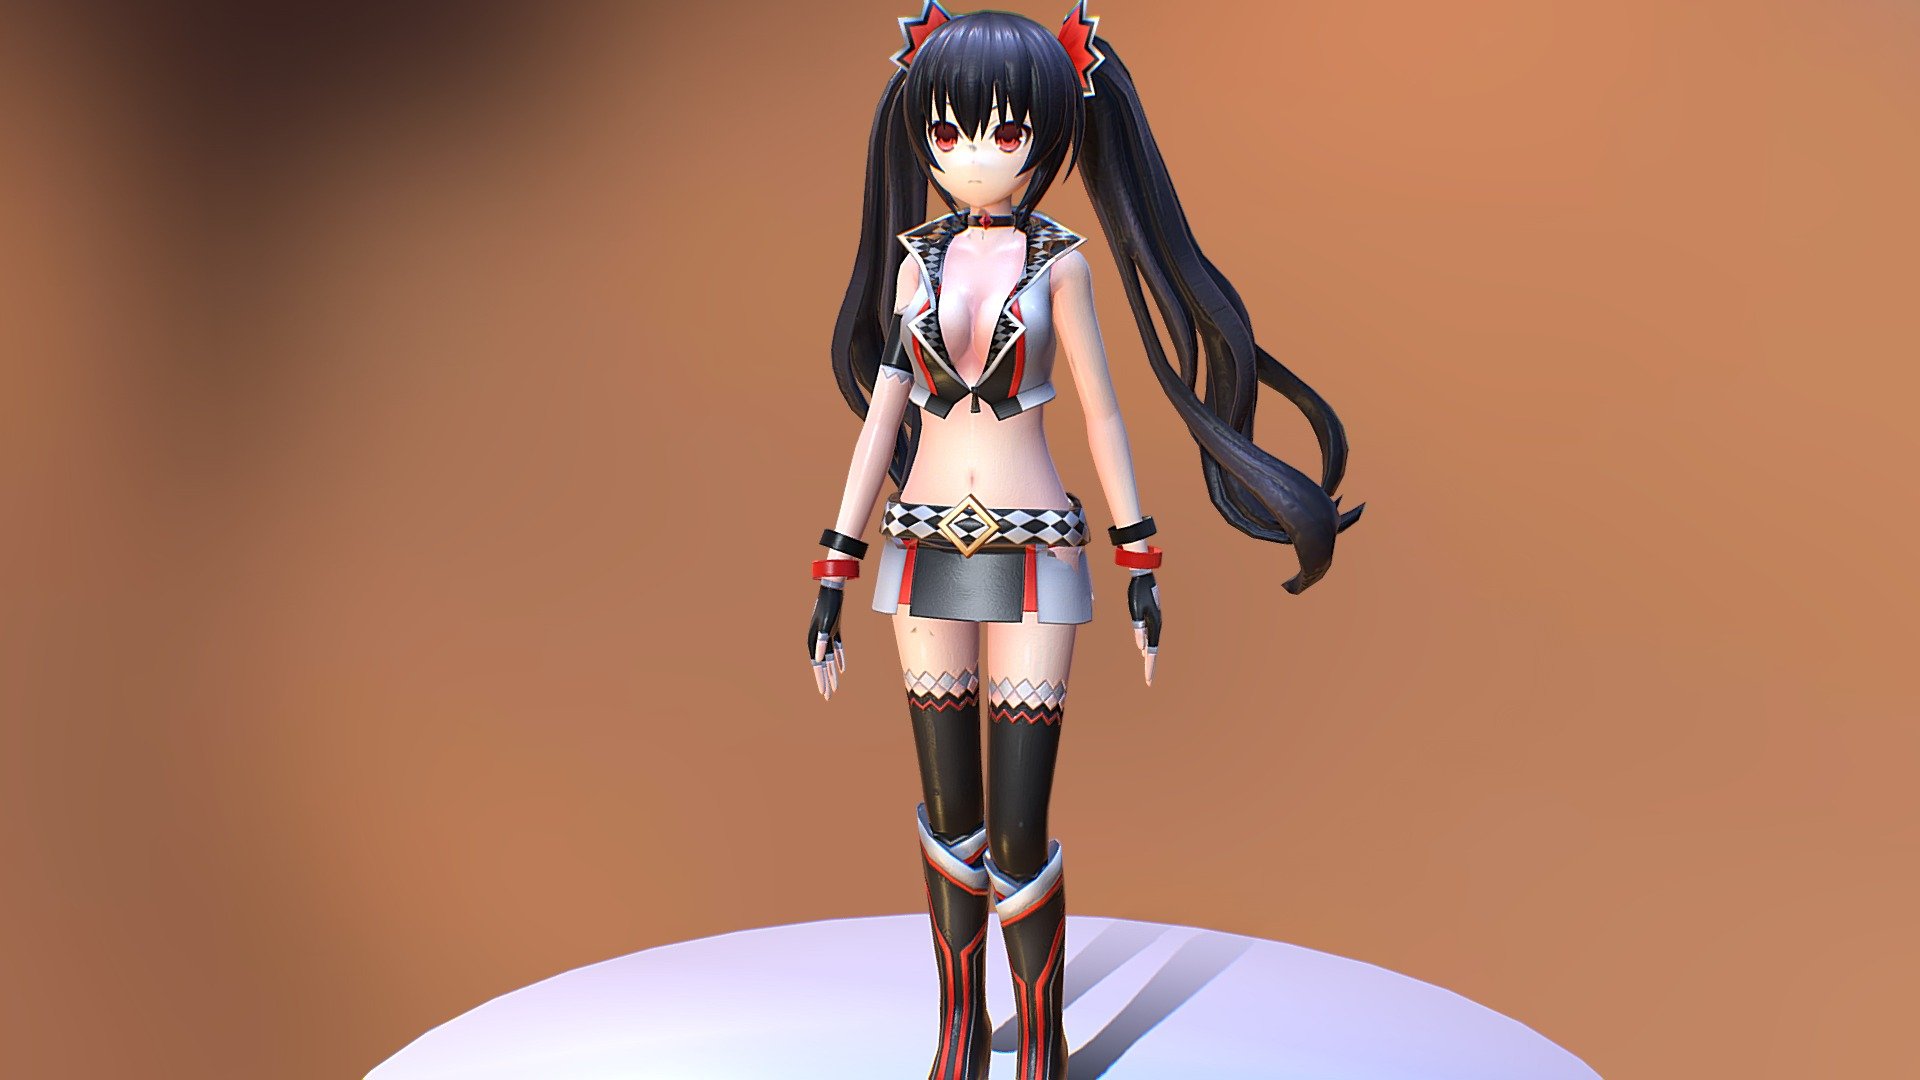 Rigged Anime Girl  2020  Outfits  Expressions  Buy Royalty Free 3D model  by murilokleine murilokleine c311317